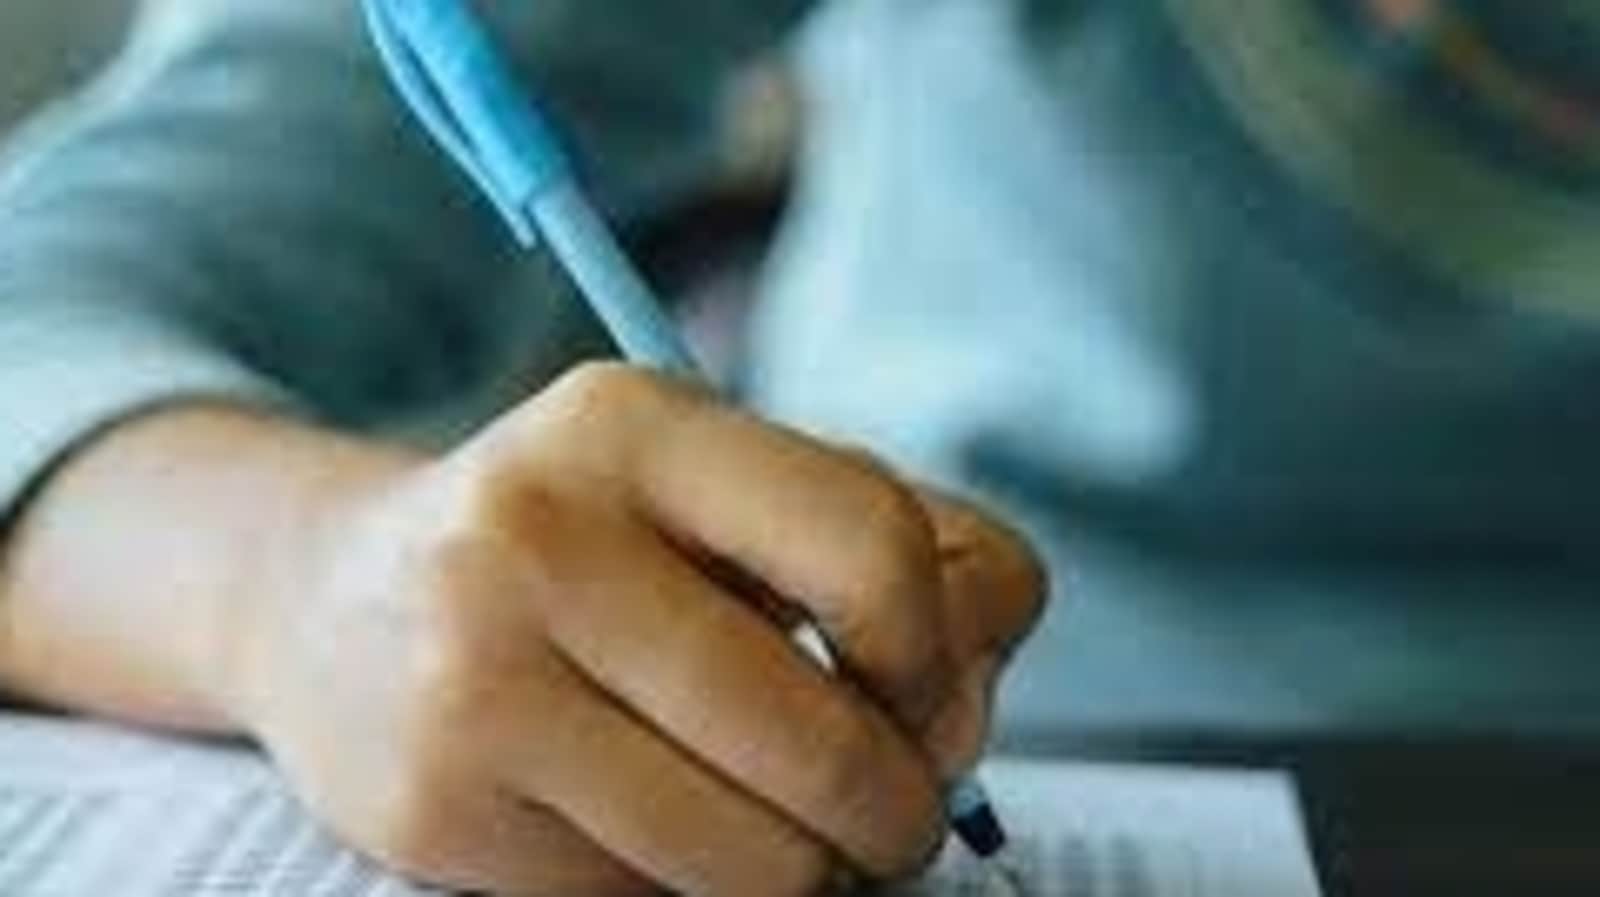 UP Board exam 2022 evaluation from April 23, good handwriting to be rewarded